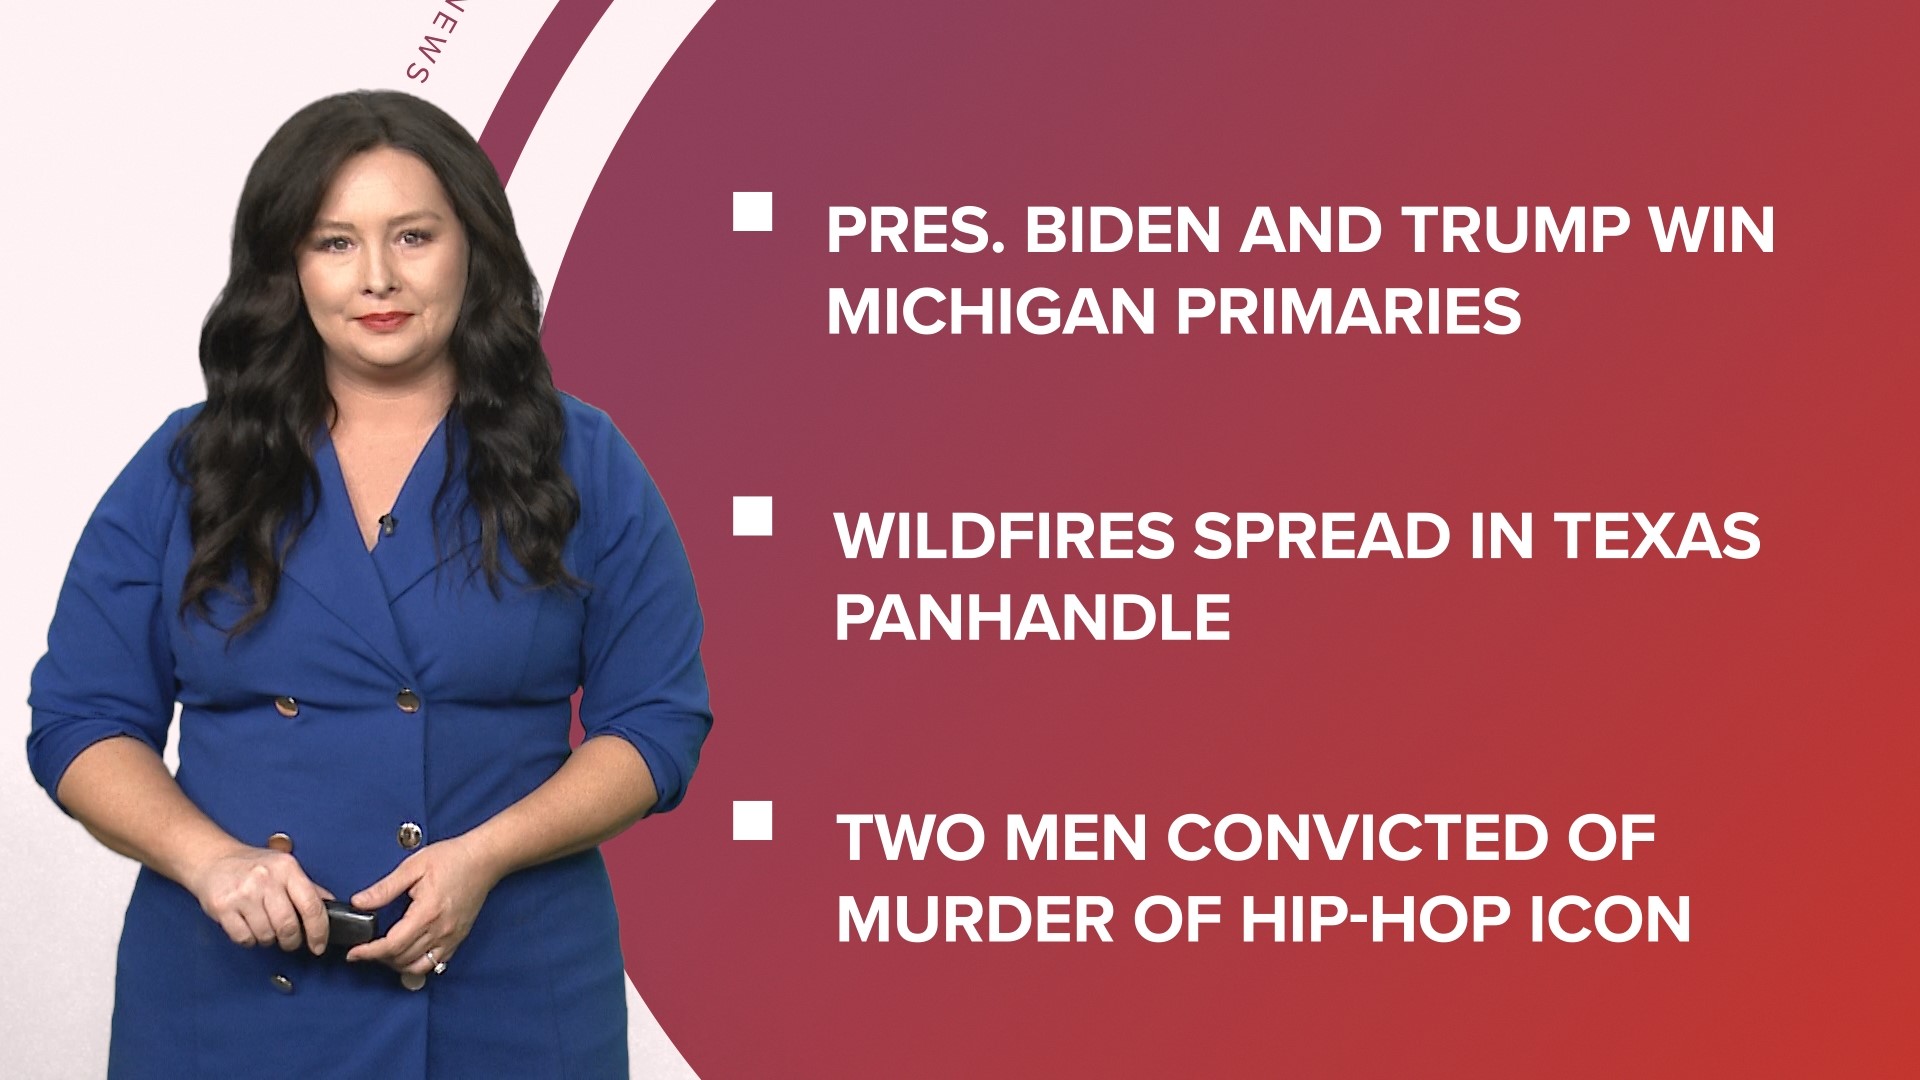 A look at what is happening in the news from Pres. Biden and Trump win the Michigan primaries to Wendy's to try new fluctuating prices and more.